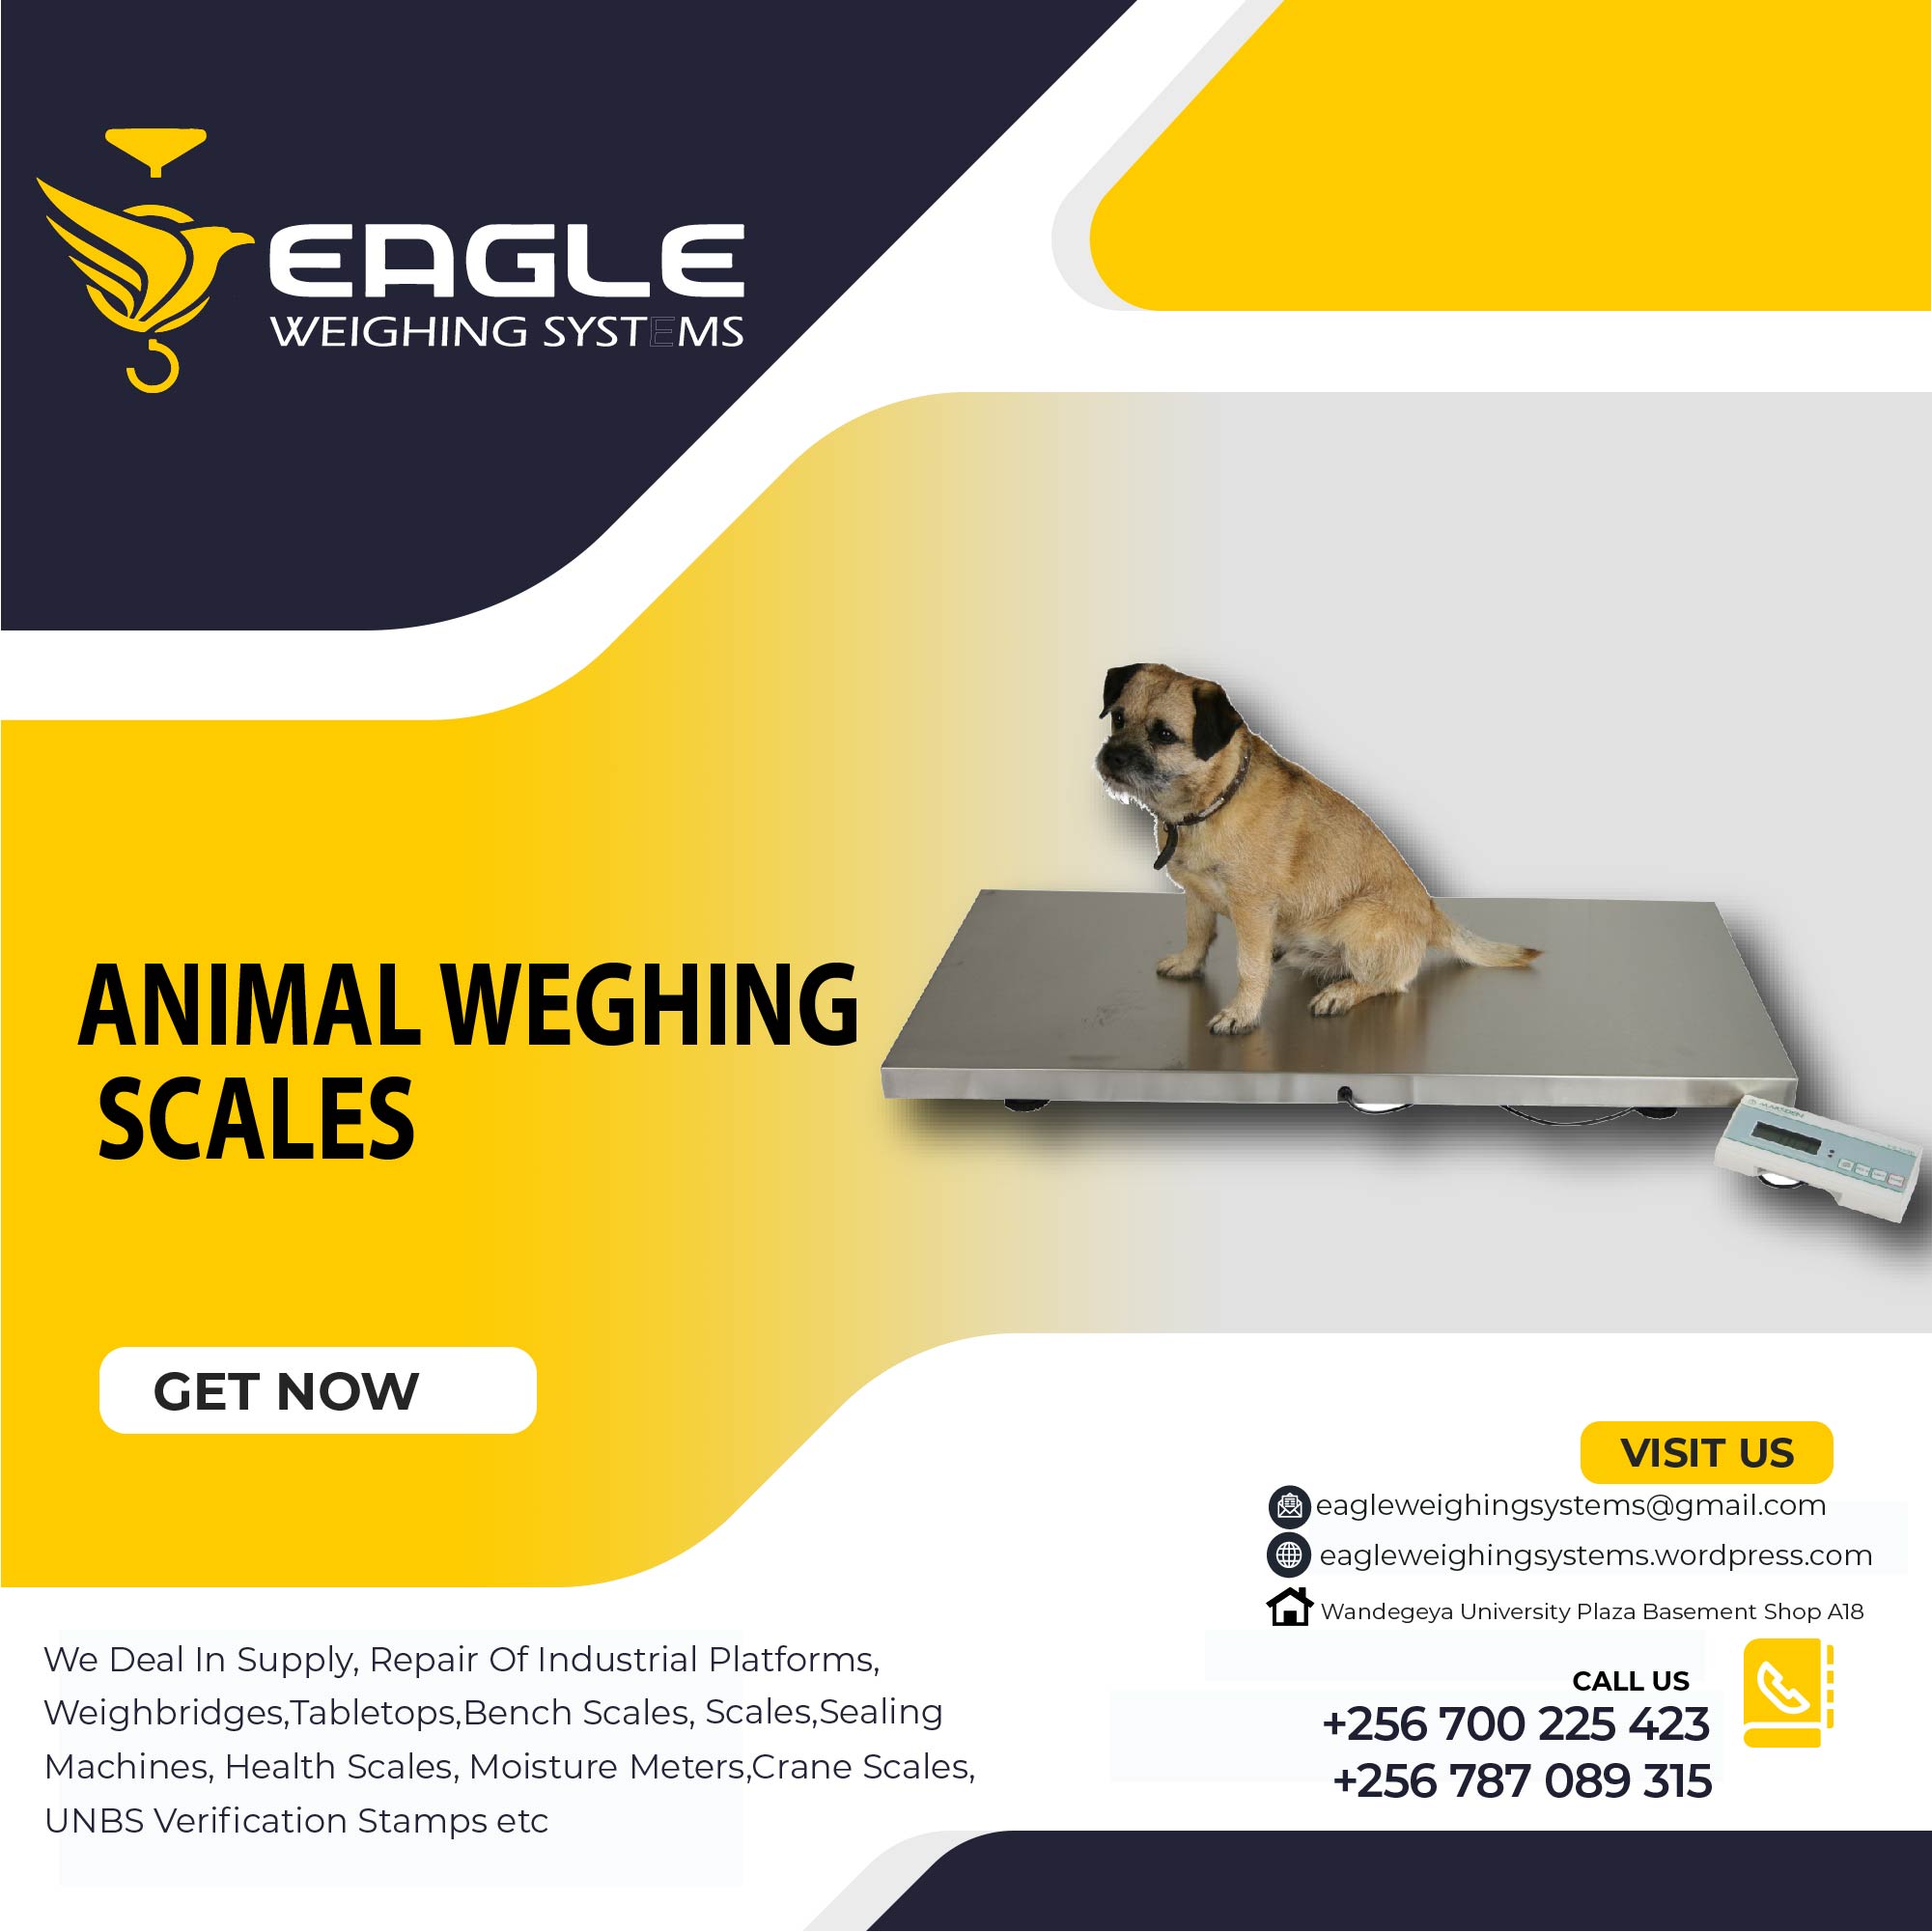 Cattle animal Weight floor weighing scales for industries in Uganda, Kampala Central Division, Central, Uganda